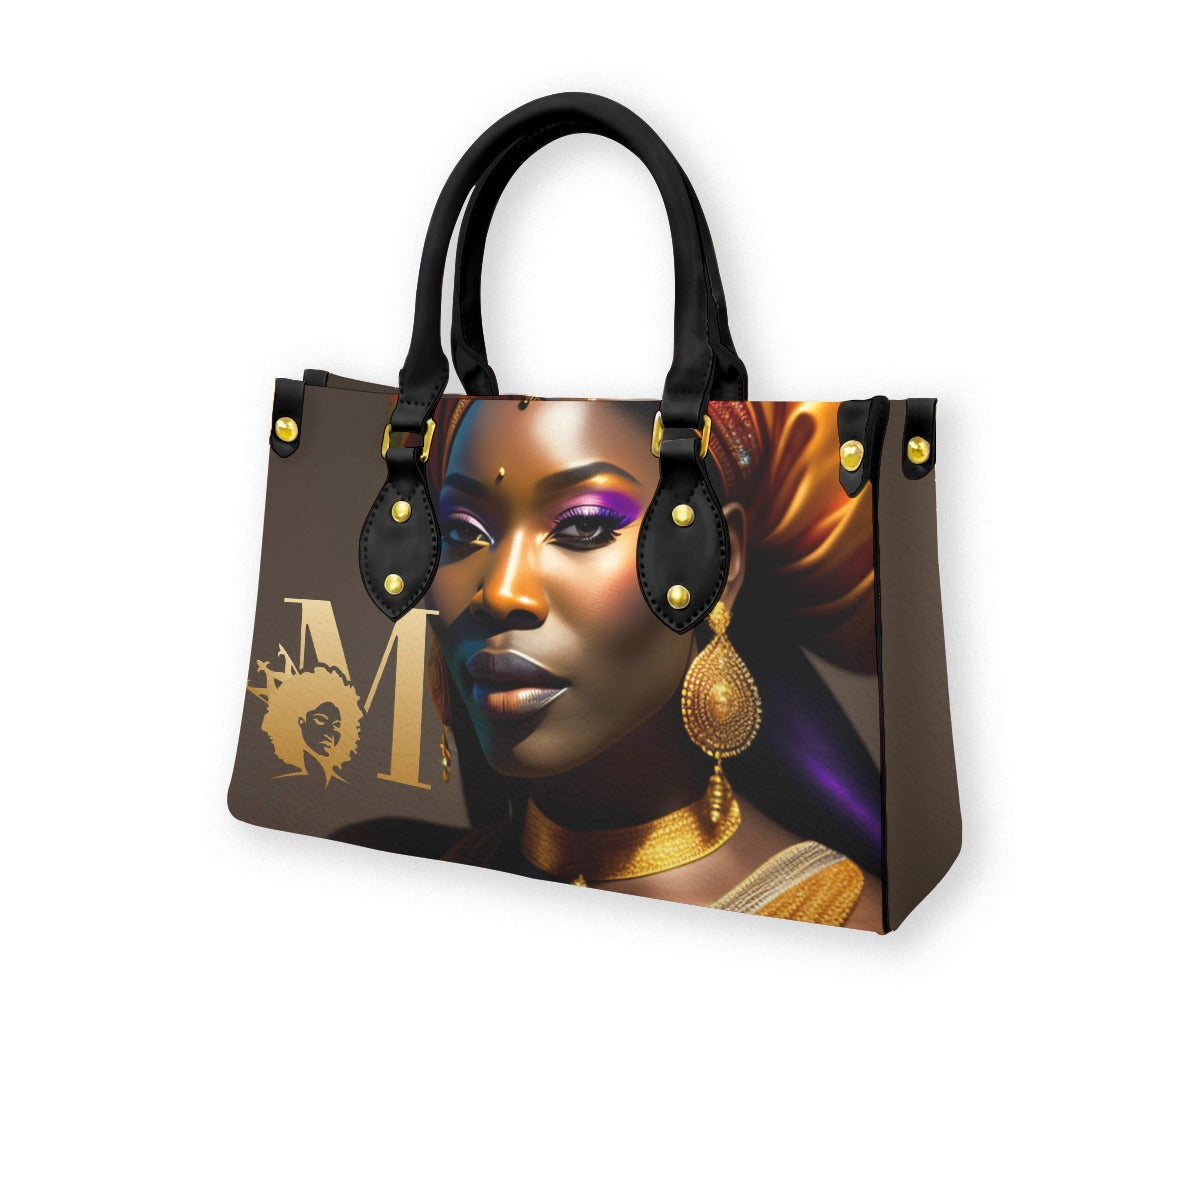 Queen To Be by Melanin Goddess - Women's Tote Bag With Black Handle